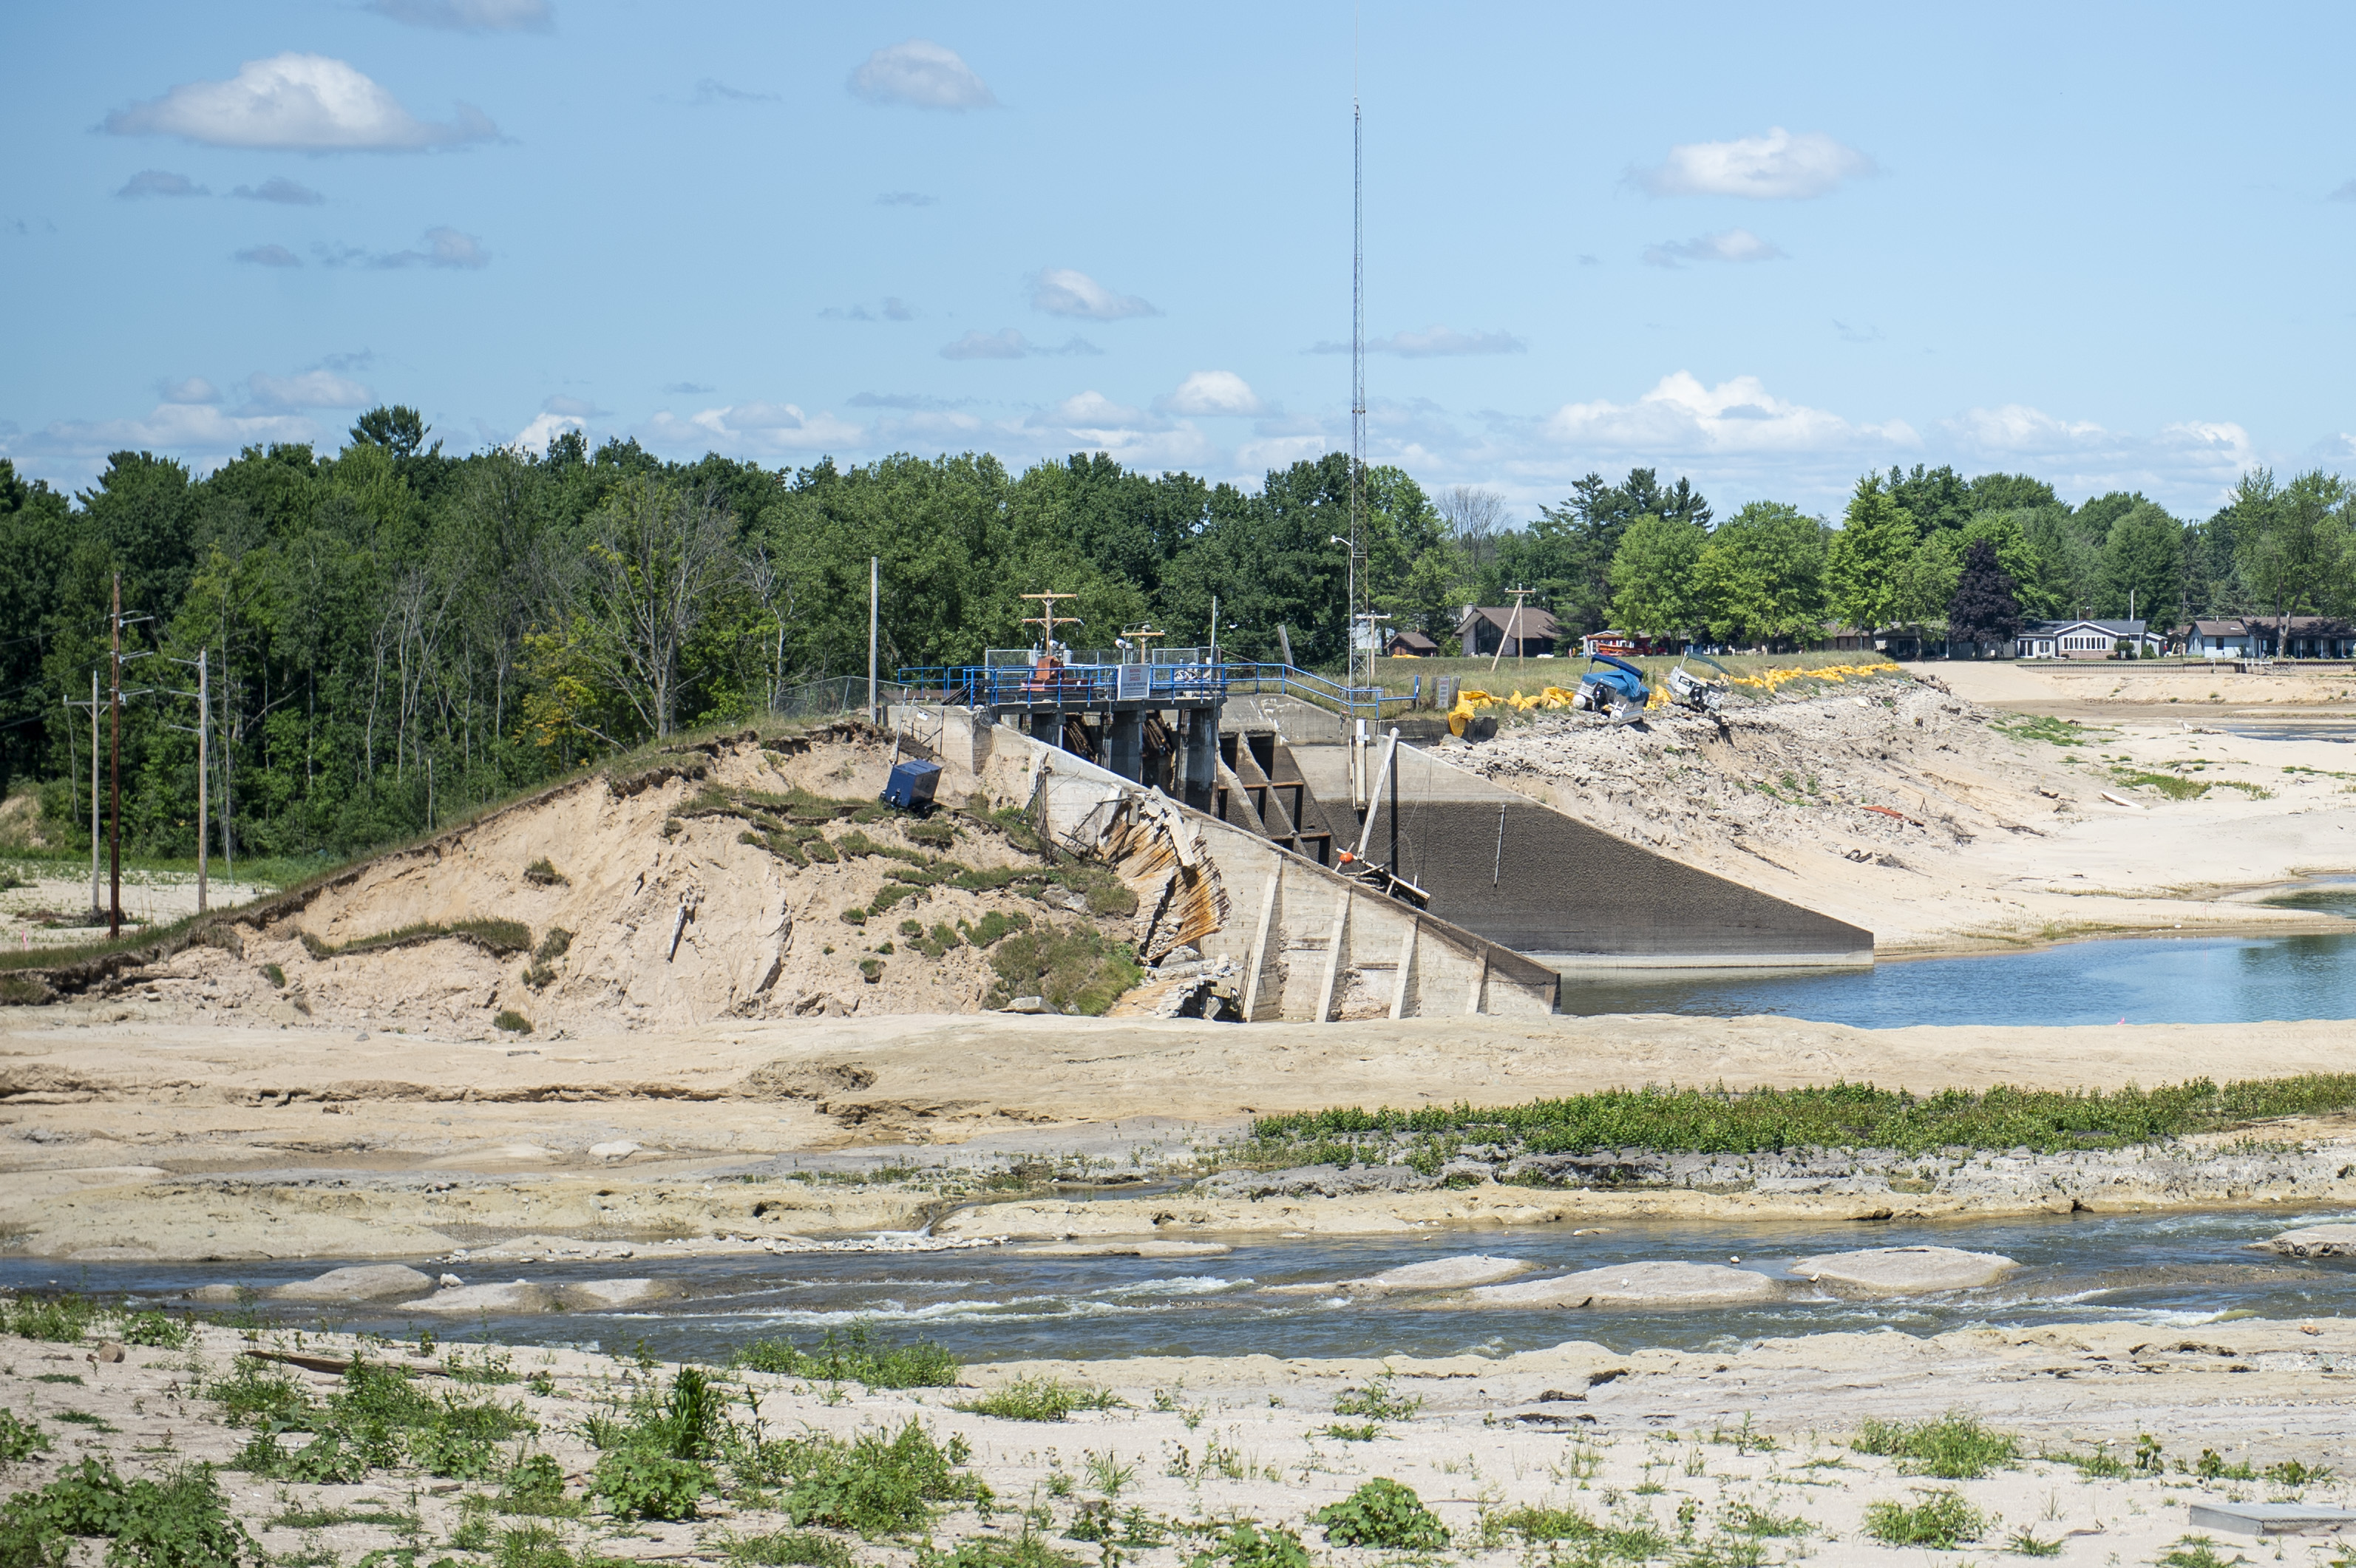 A view of the Edenville Dam in Hope Township on Thursday, July 30, 2020. The devastating flood in May gushed over the majority of land in this area. (Kaytie Boomer | MLive.com)